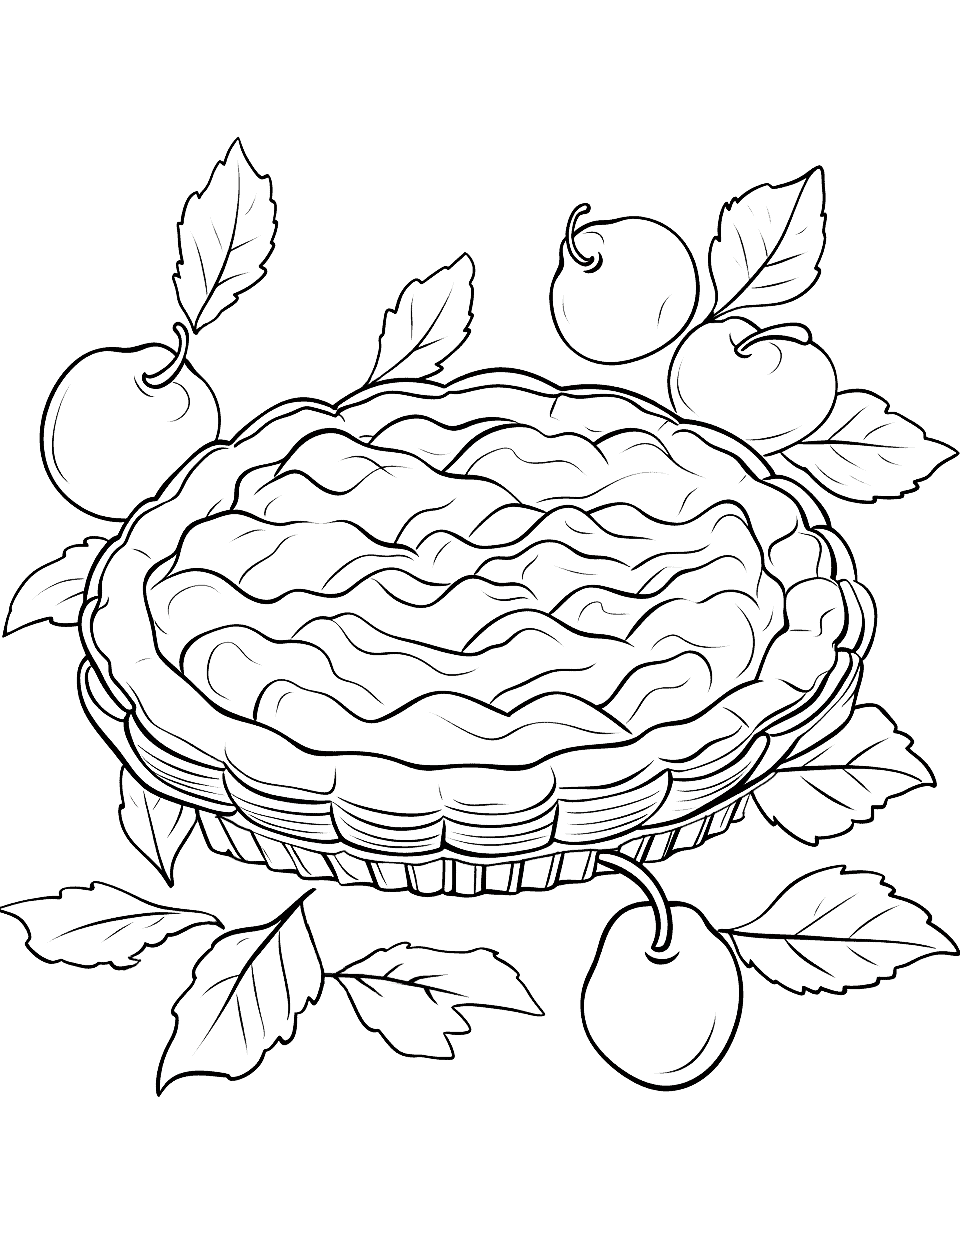 Holiday Pumpkin Pie Fall Coloring Page - A festive coloring page with a pumpkin pie ready for Thanksgiving.